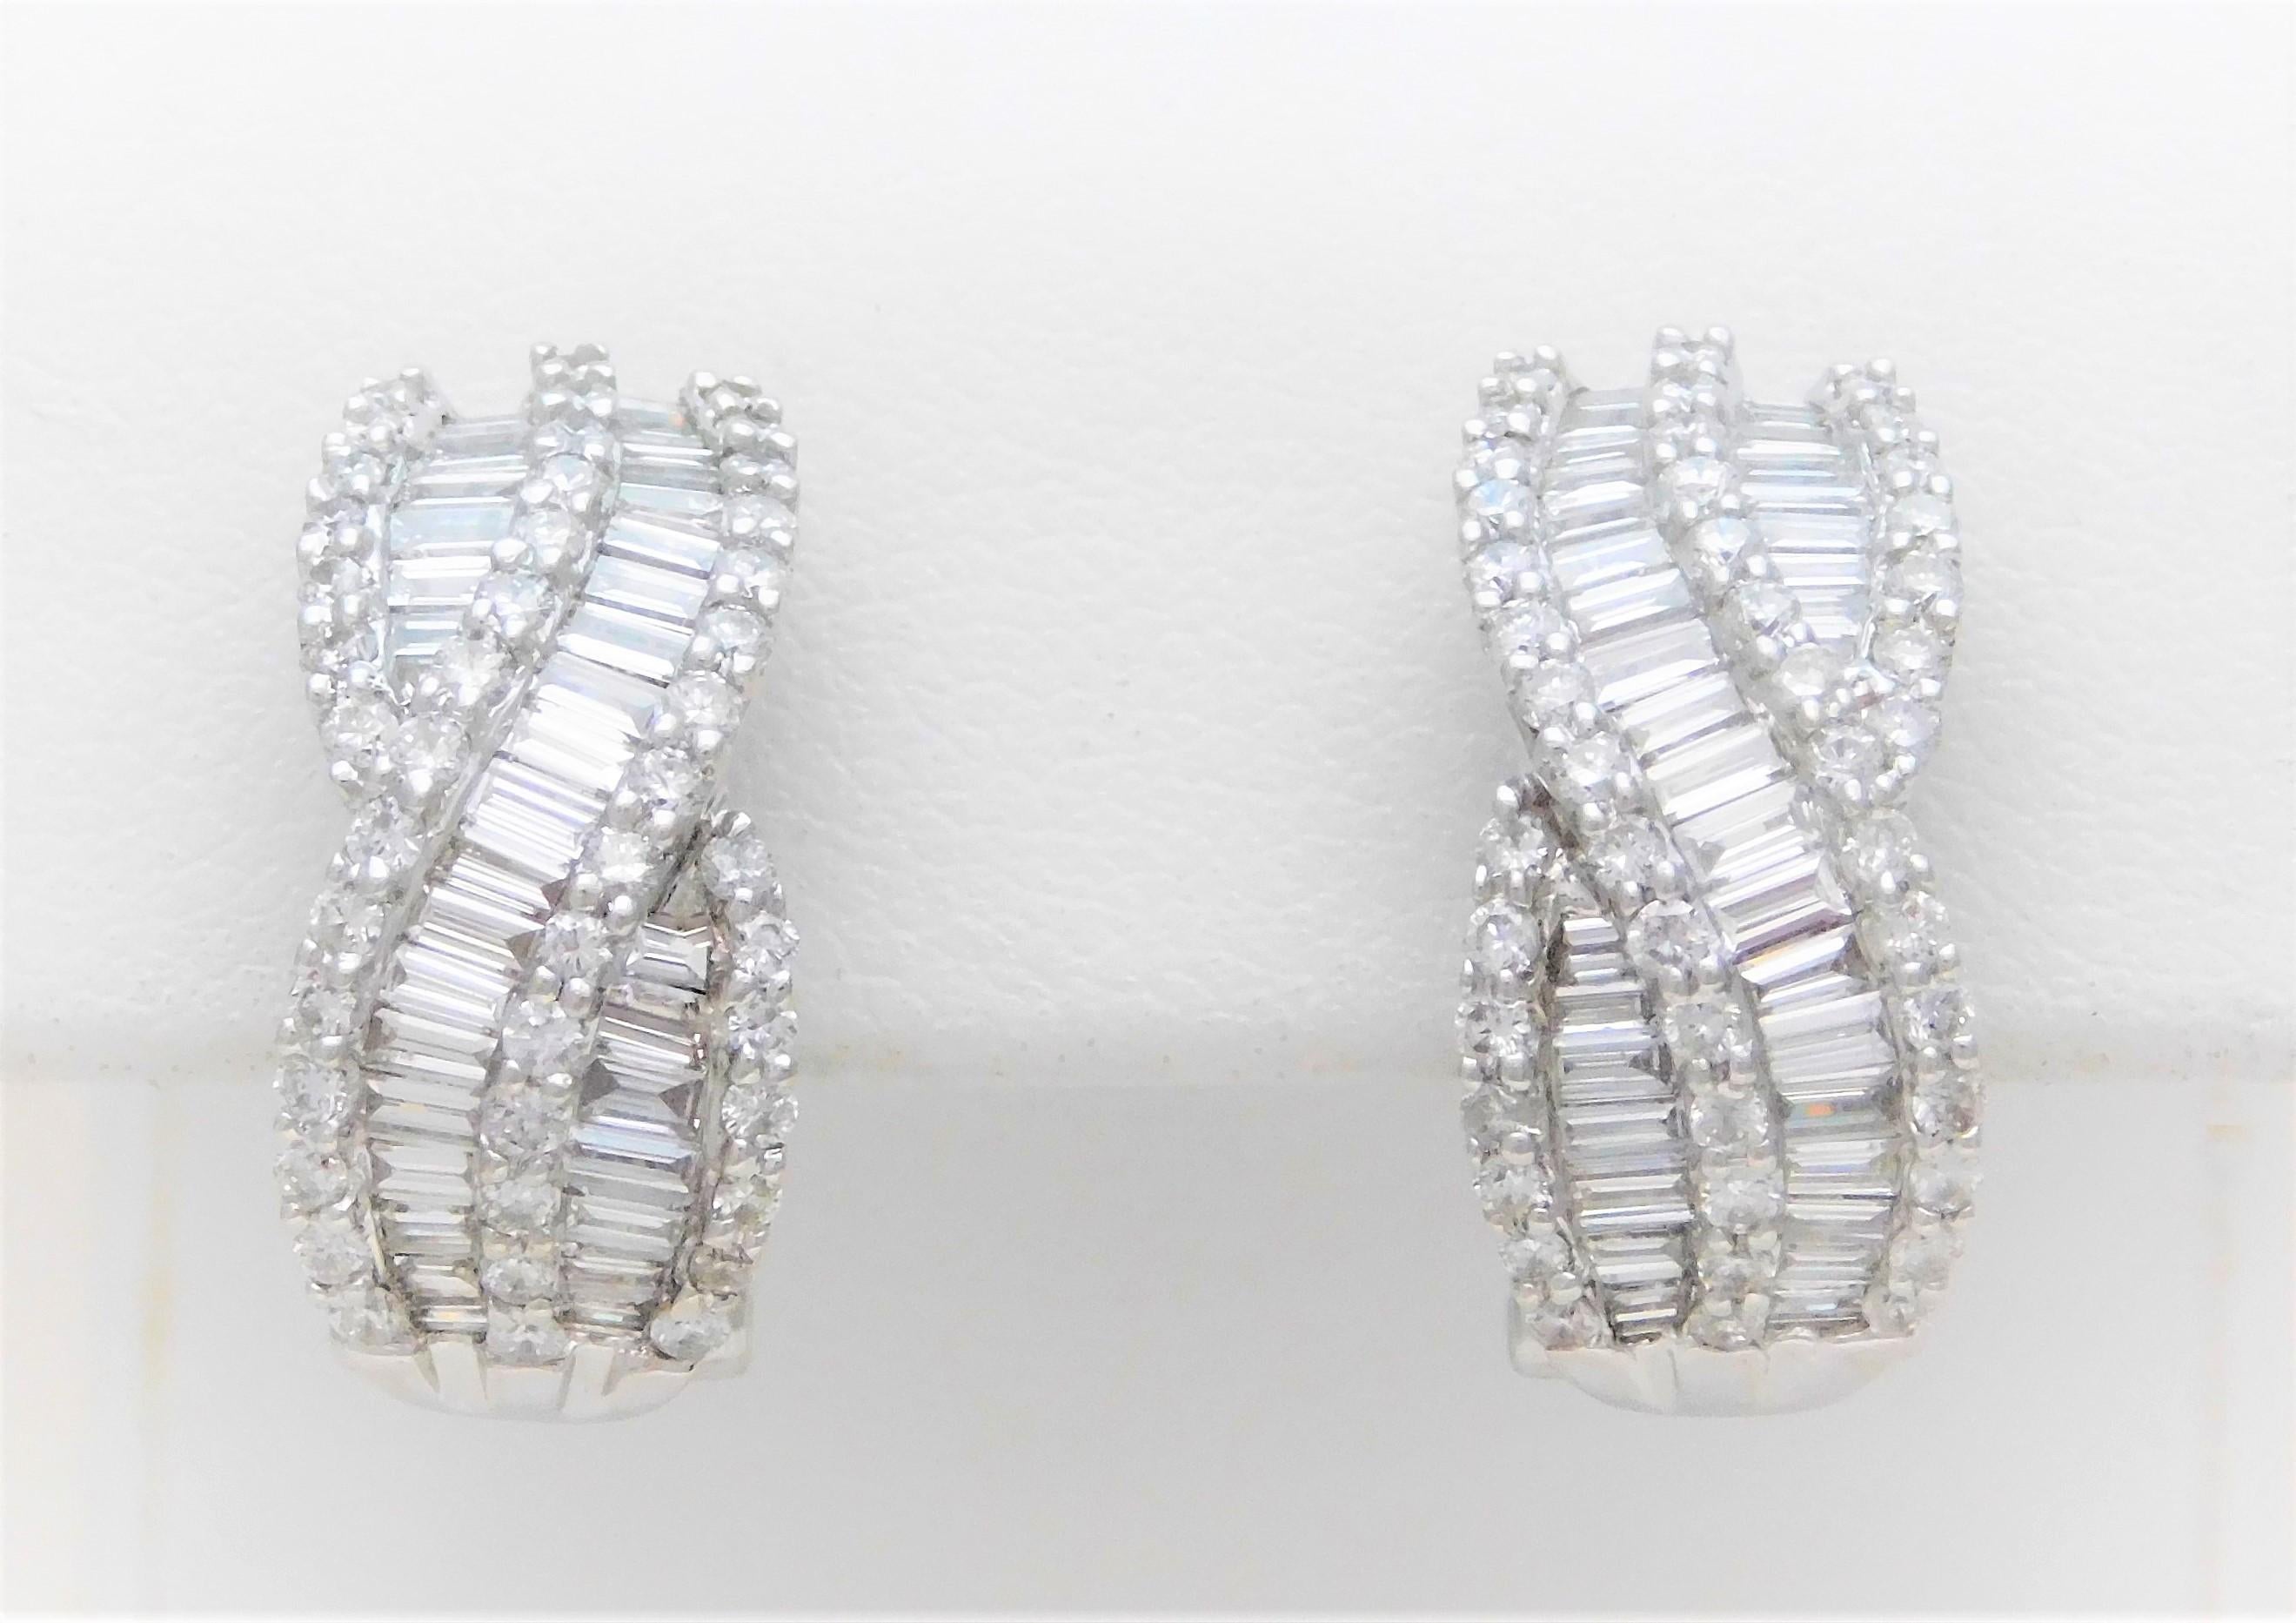 These modern drop-style earrings have been crafted in solid 18k white gold.  They have each been adorned with a total of 33 baguette-cut and 44 round full-cut natural high-quality diamonds approximating 2.60 carats in total diamond weight.  The